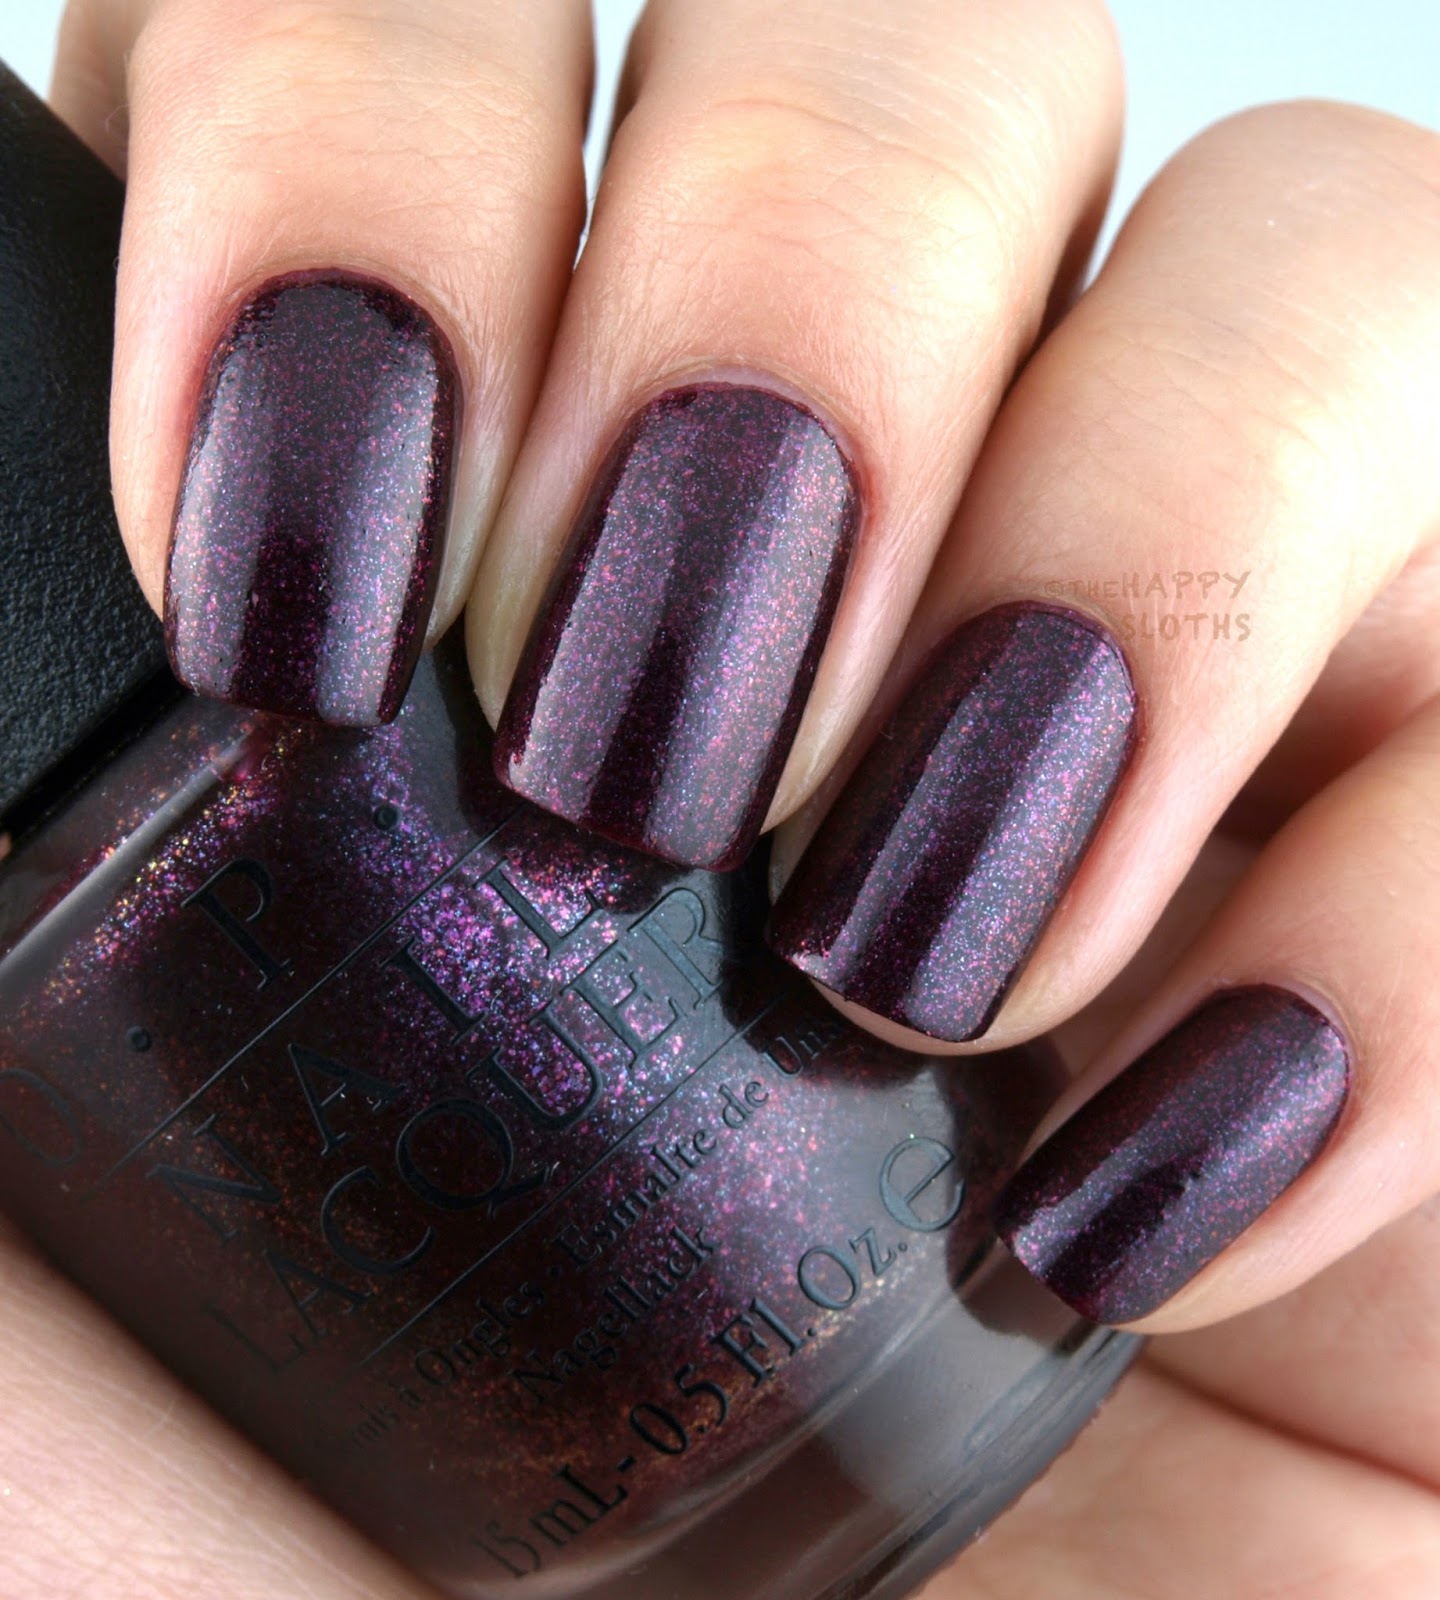 OPI Holiday 2016 Breakfast at Tiffany's Collection: Review and Swatches